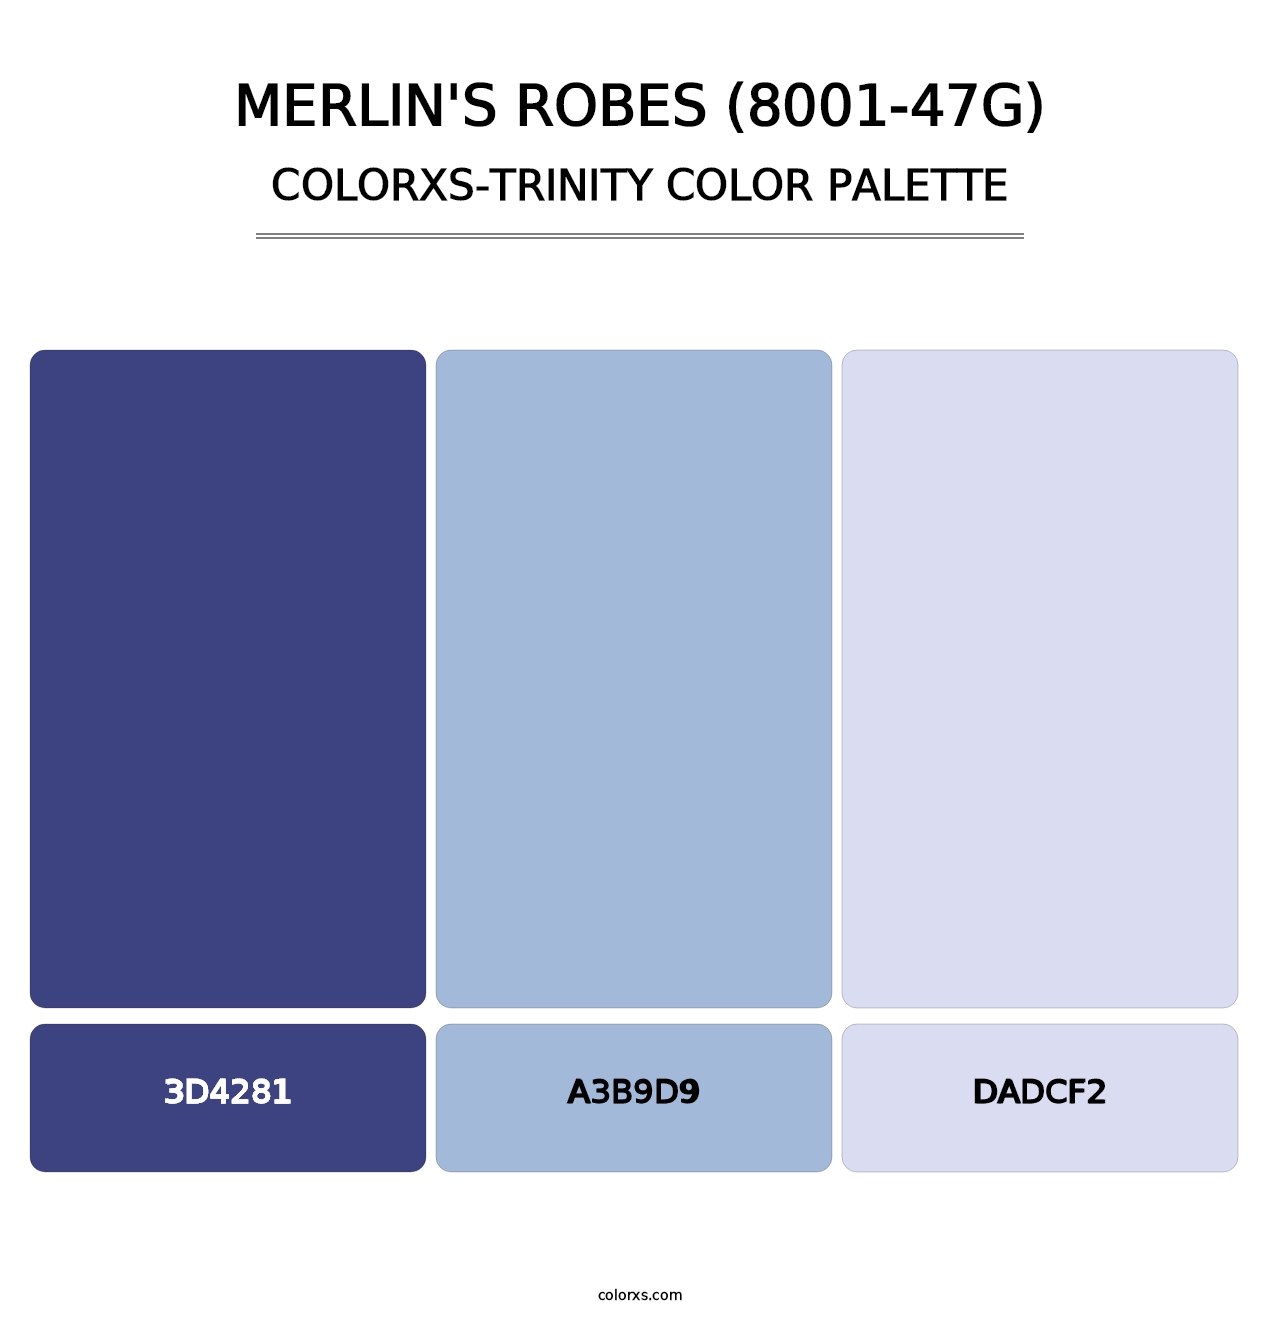 Merlin's Robes (8001-47G) - Colorxs Trinity Palette